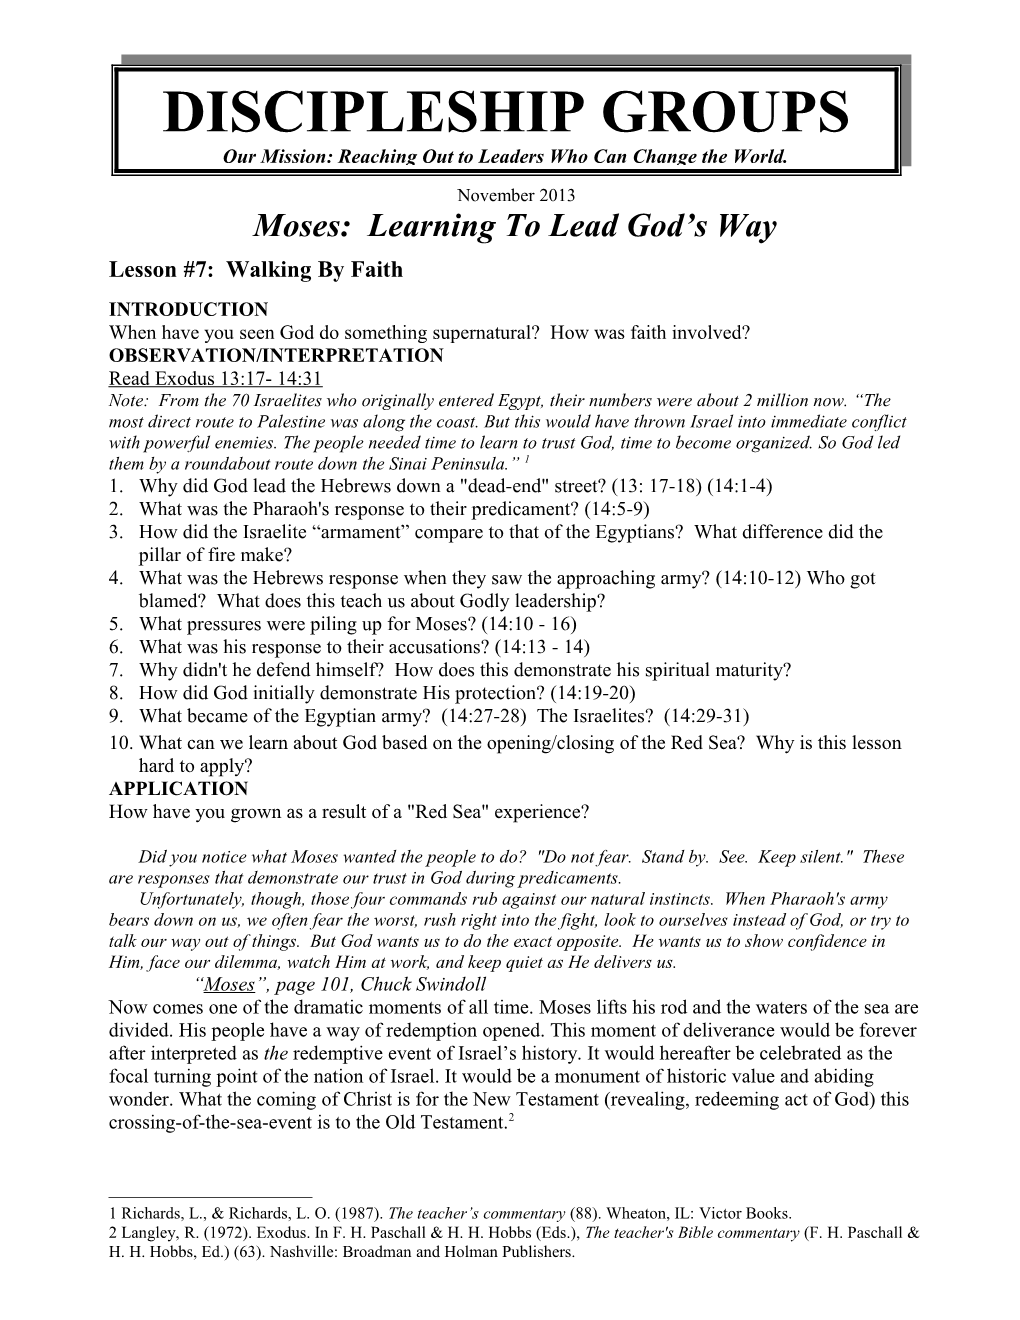 Moses: Learning to Lead God S Way